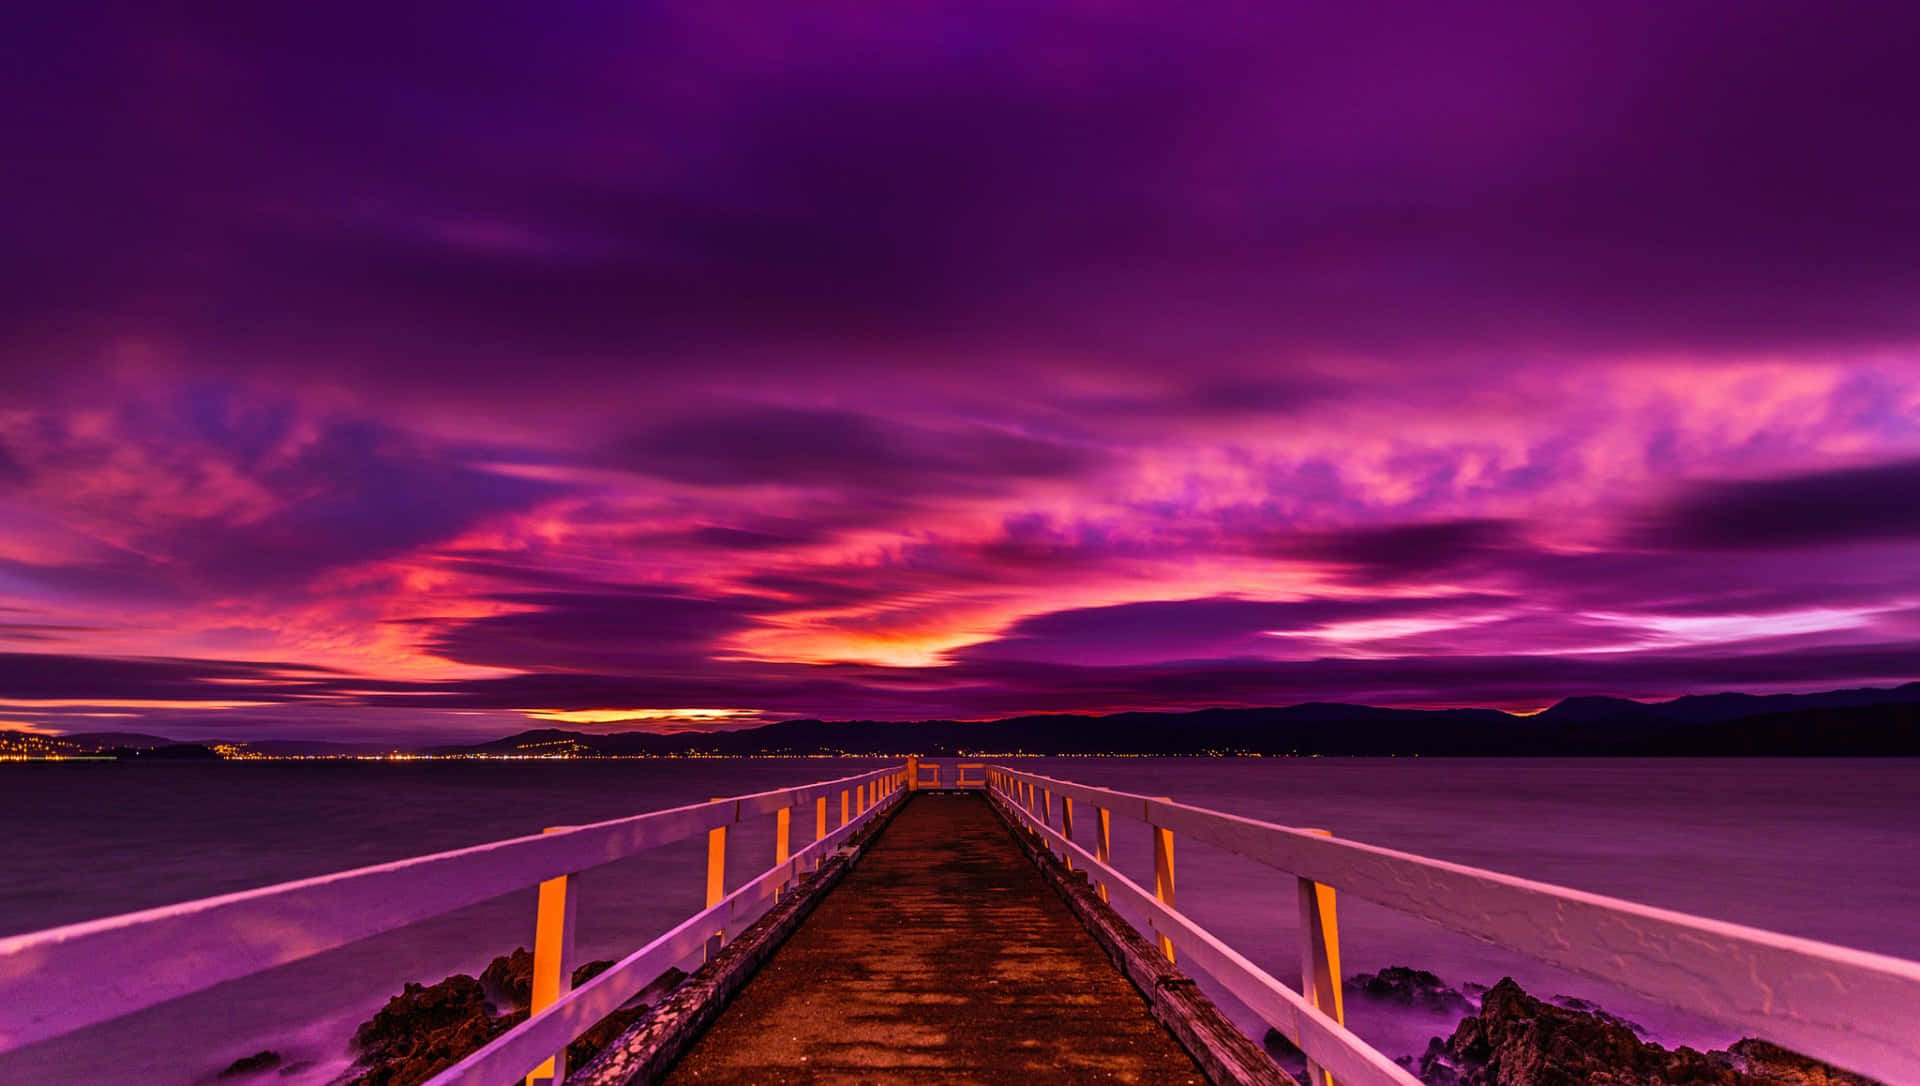 Watch the perfect blues and purples come together in this beautiful sunset. Wallpaper